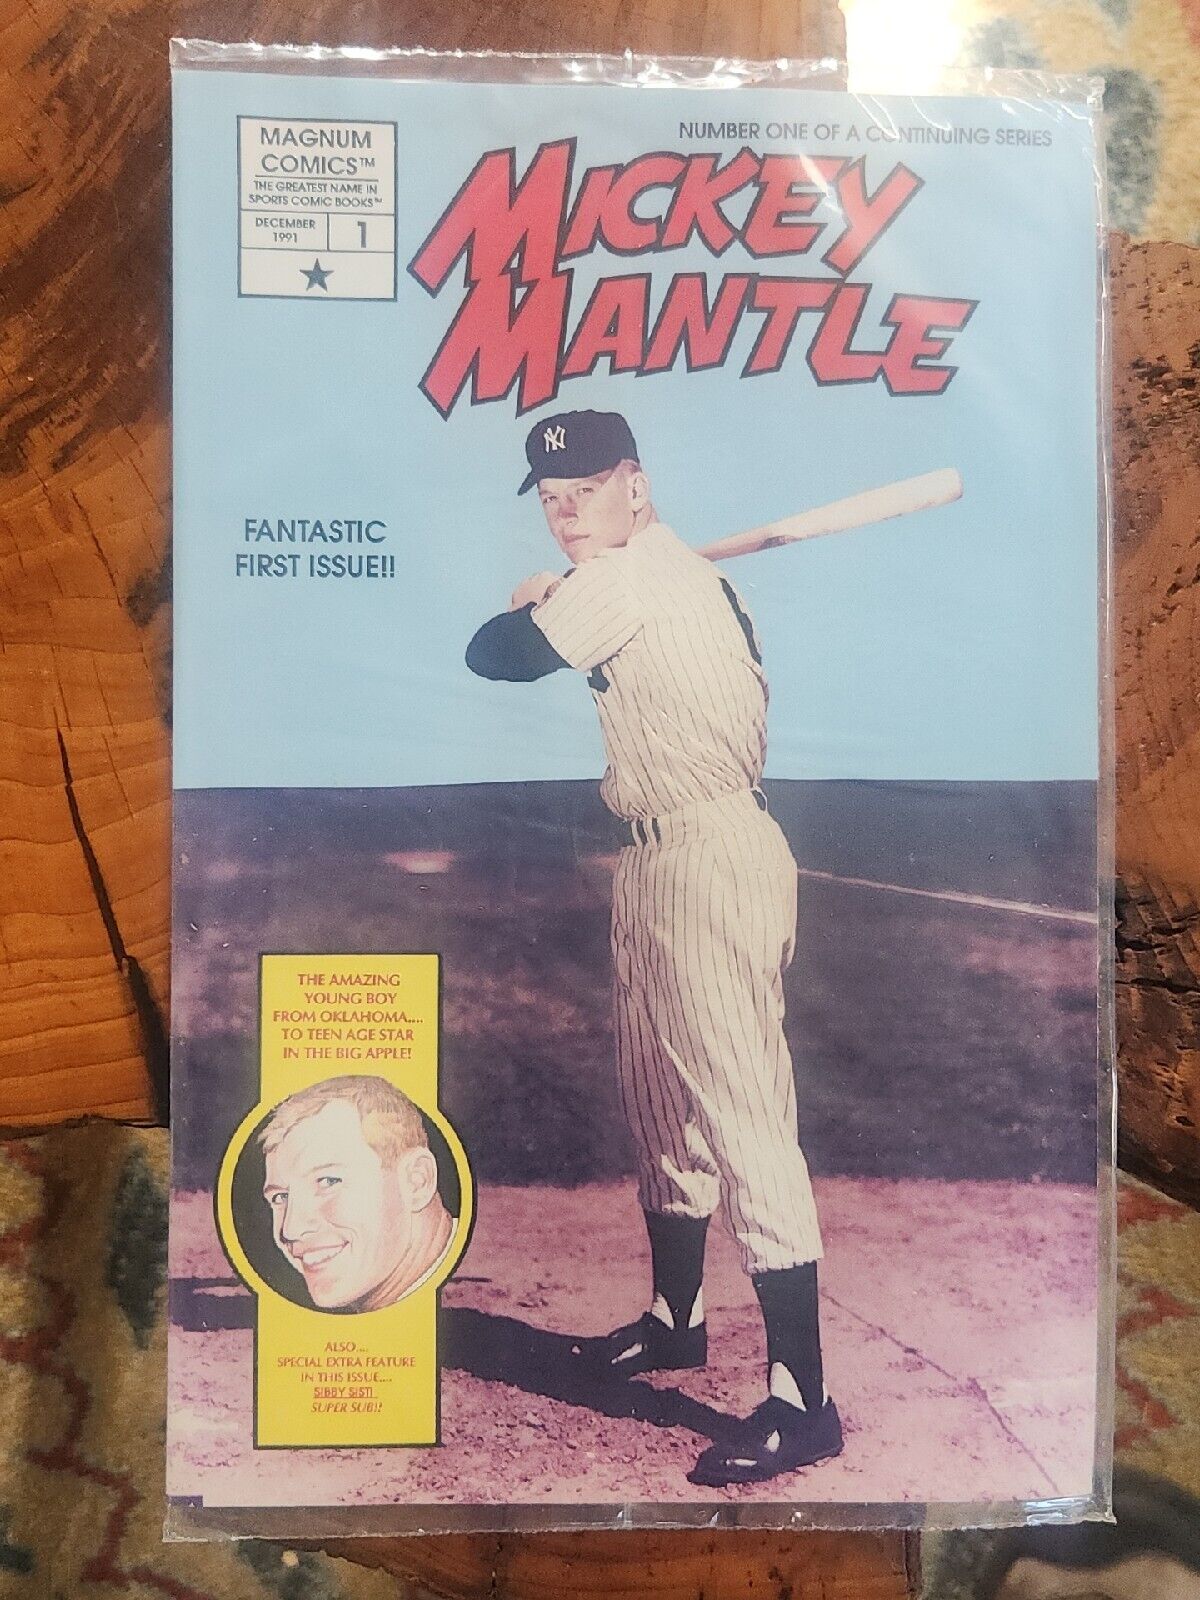 Magnum Comics #1 Mickey Mantle '91. SEALED, NEW IN PACKAGE